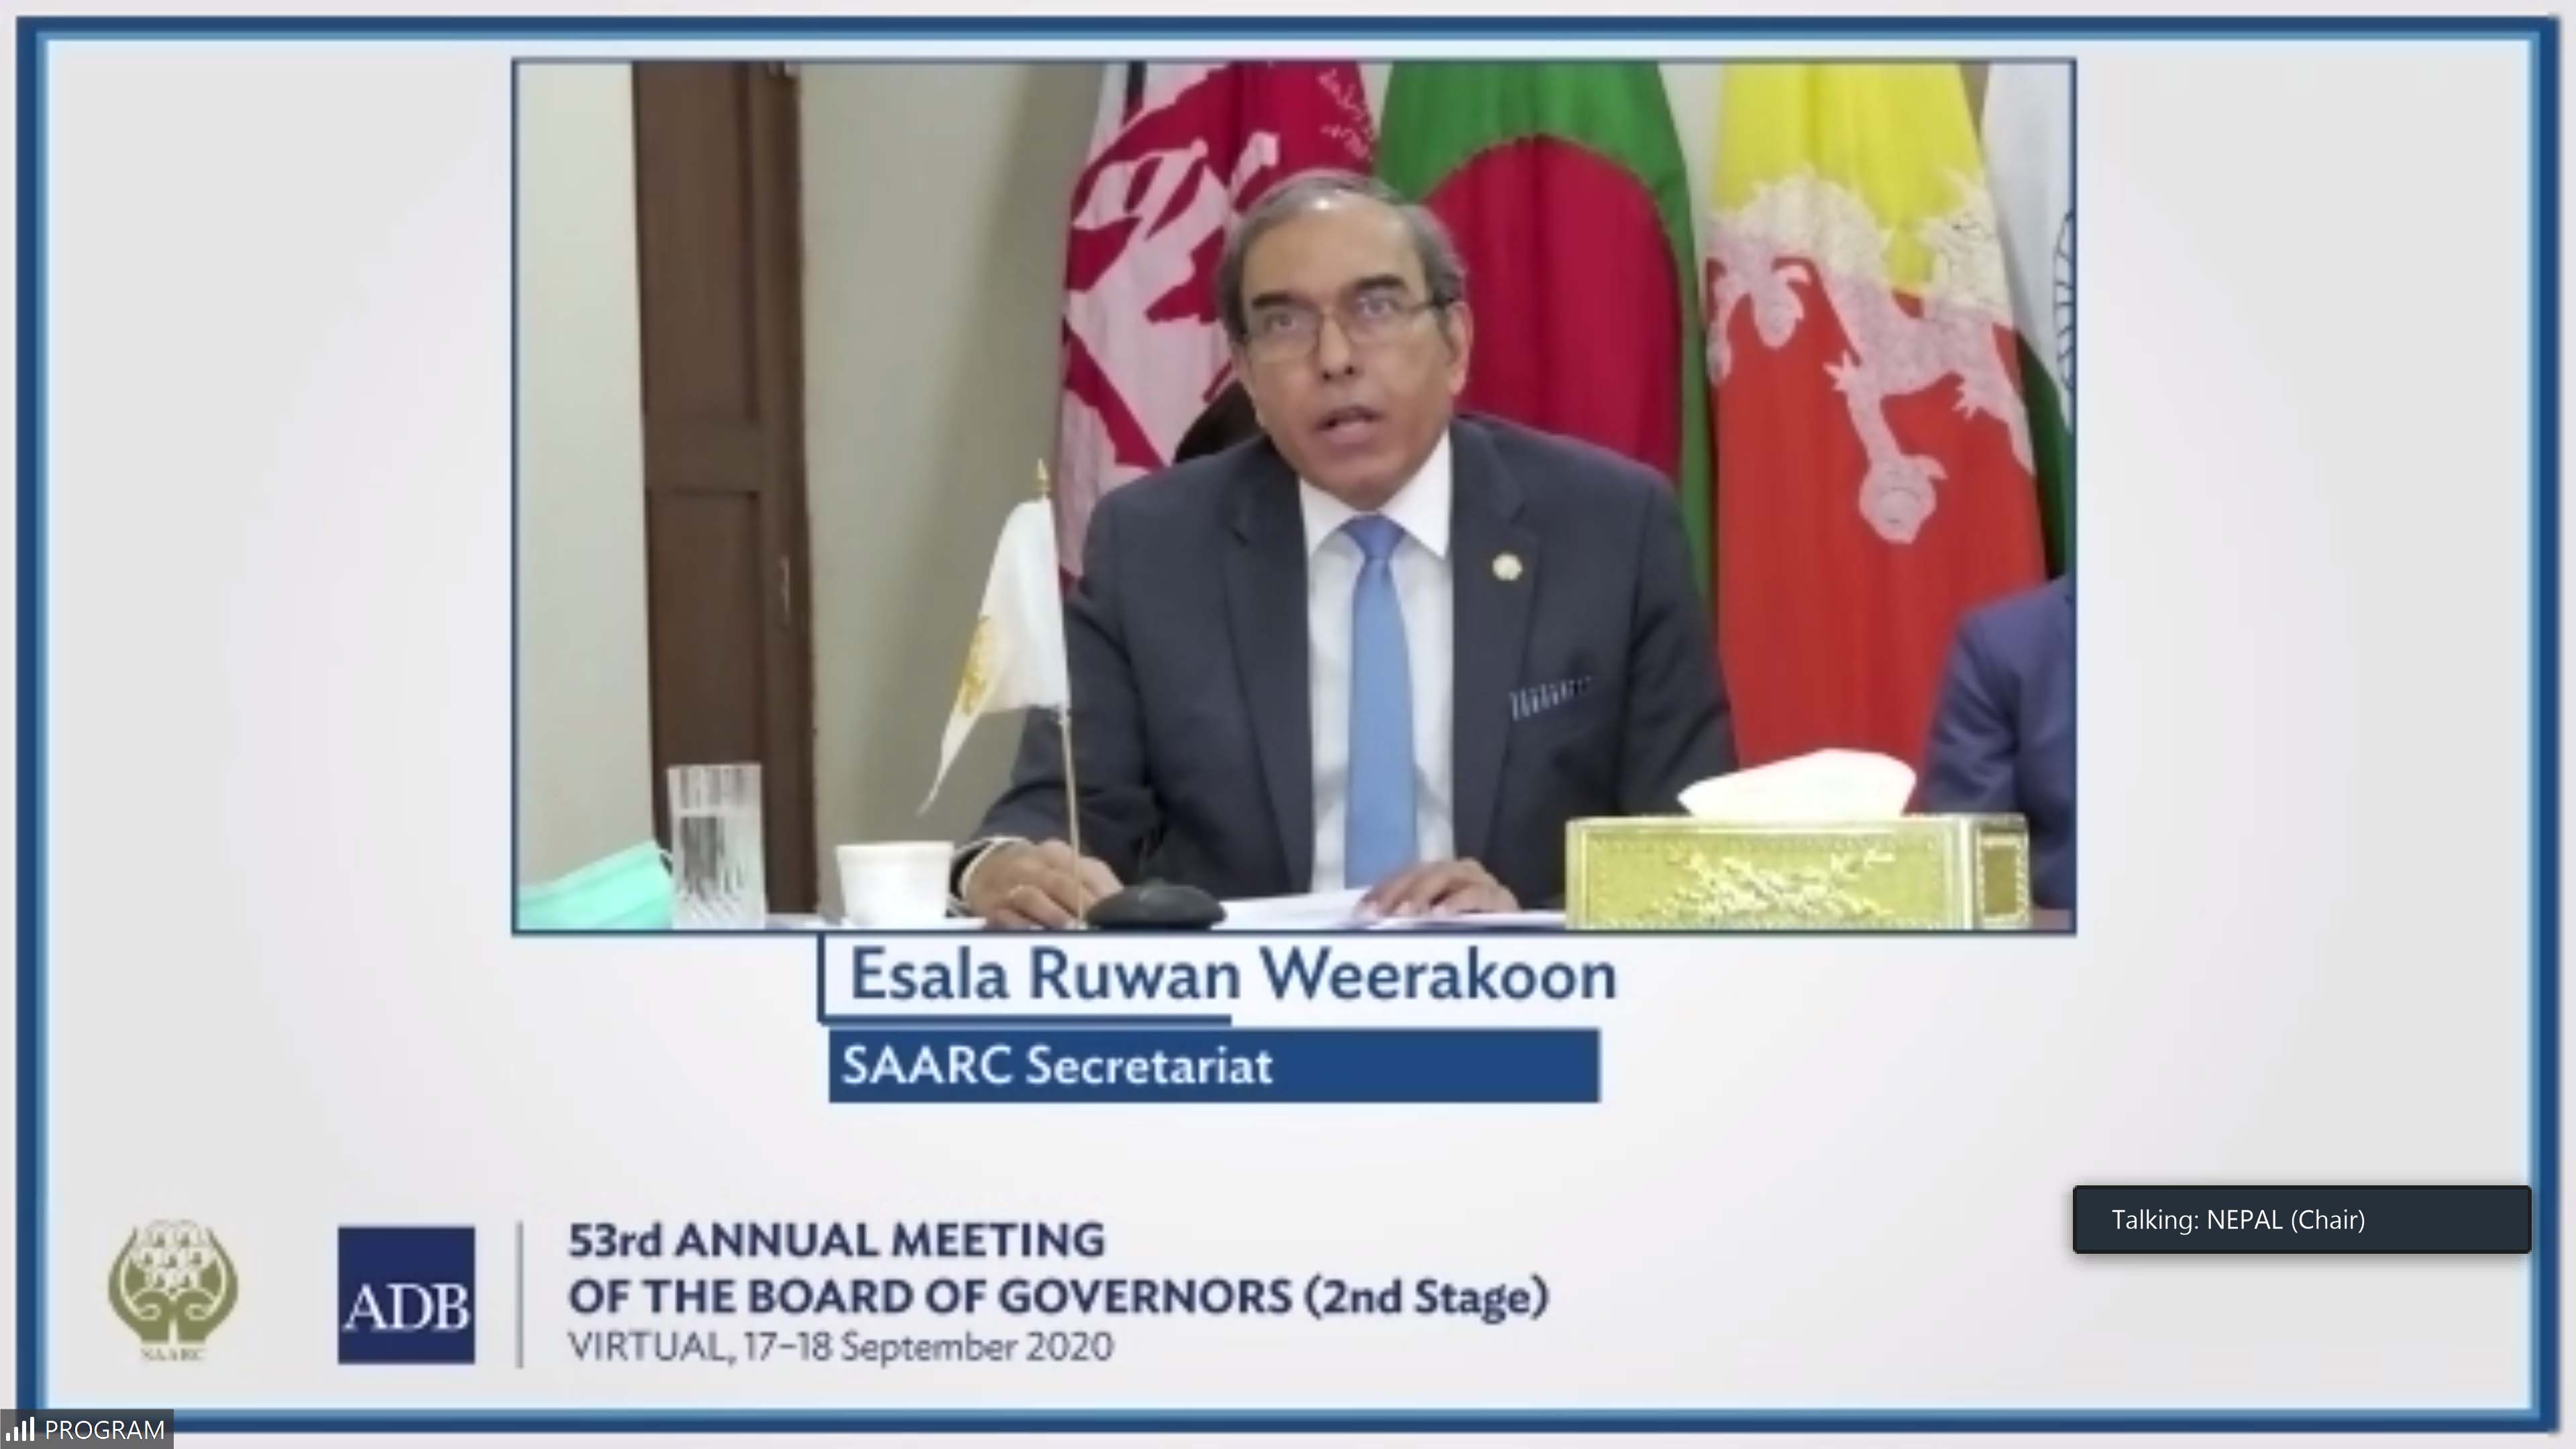 Press Release of the Fifteenth Informal Meeting of SAARC Finance Ministers, 16 Sept 2020